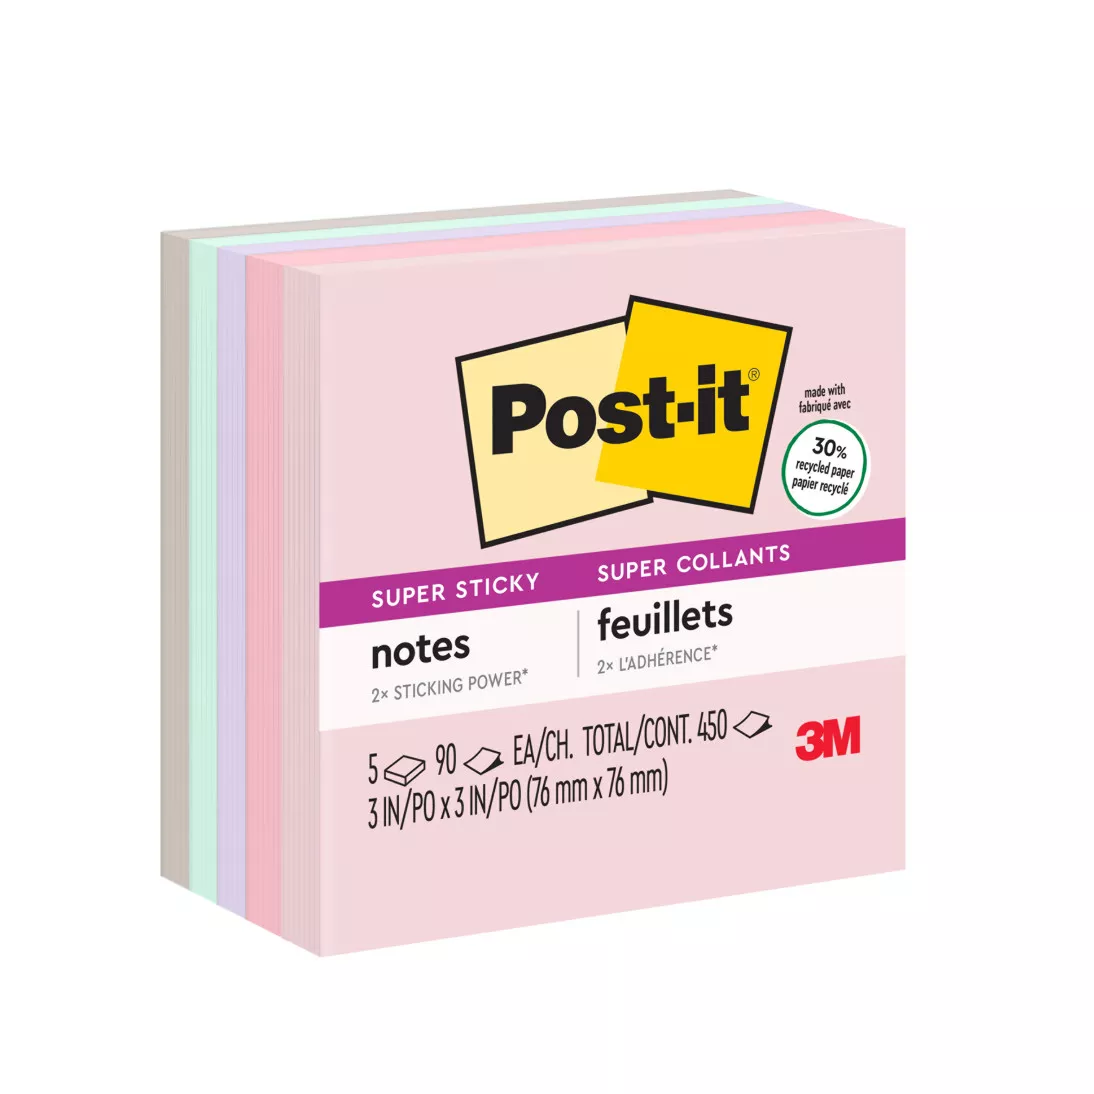 Post-it® Super Sticky Recycled Notes 654-5SSNRP, 3 in x 3 in (76 mm x 76
mm) Bali Collection